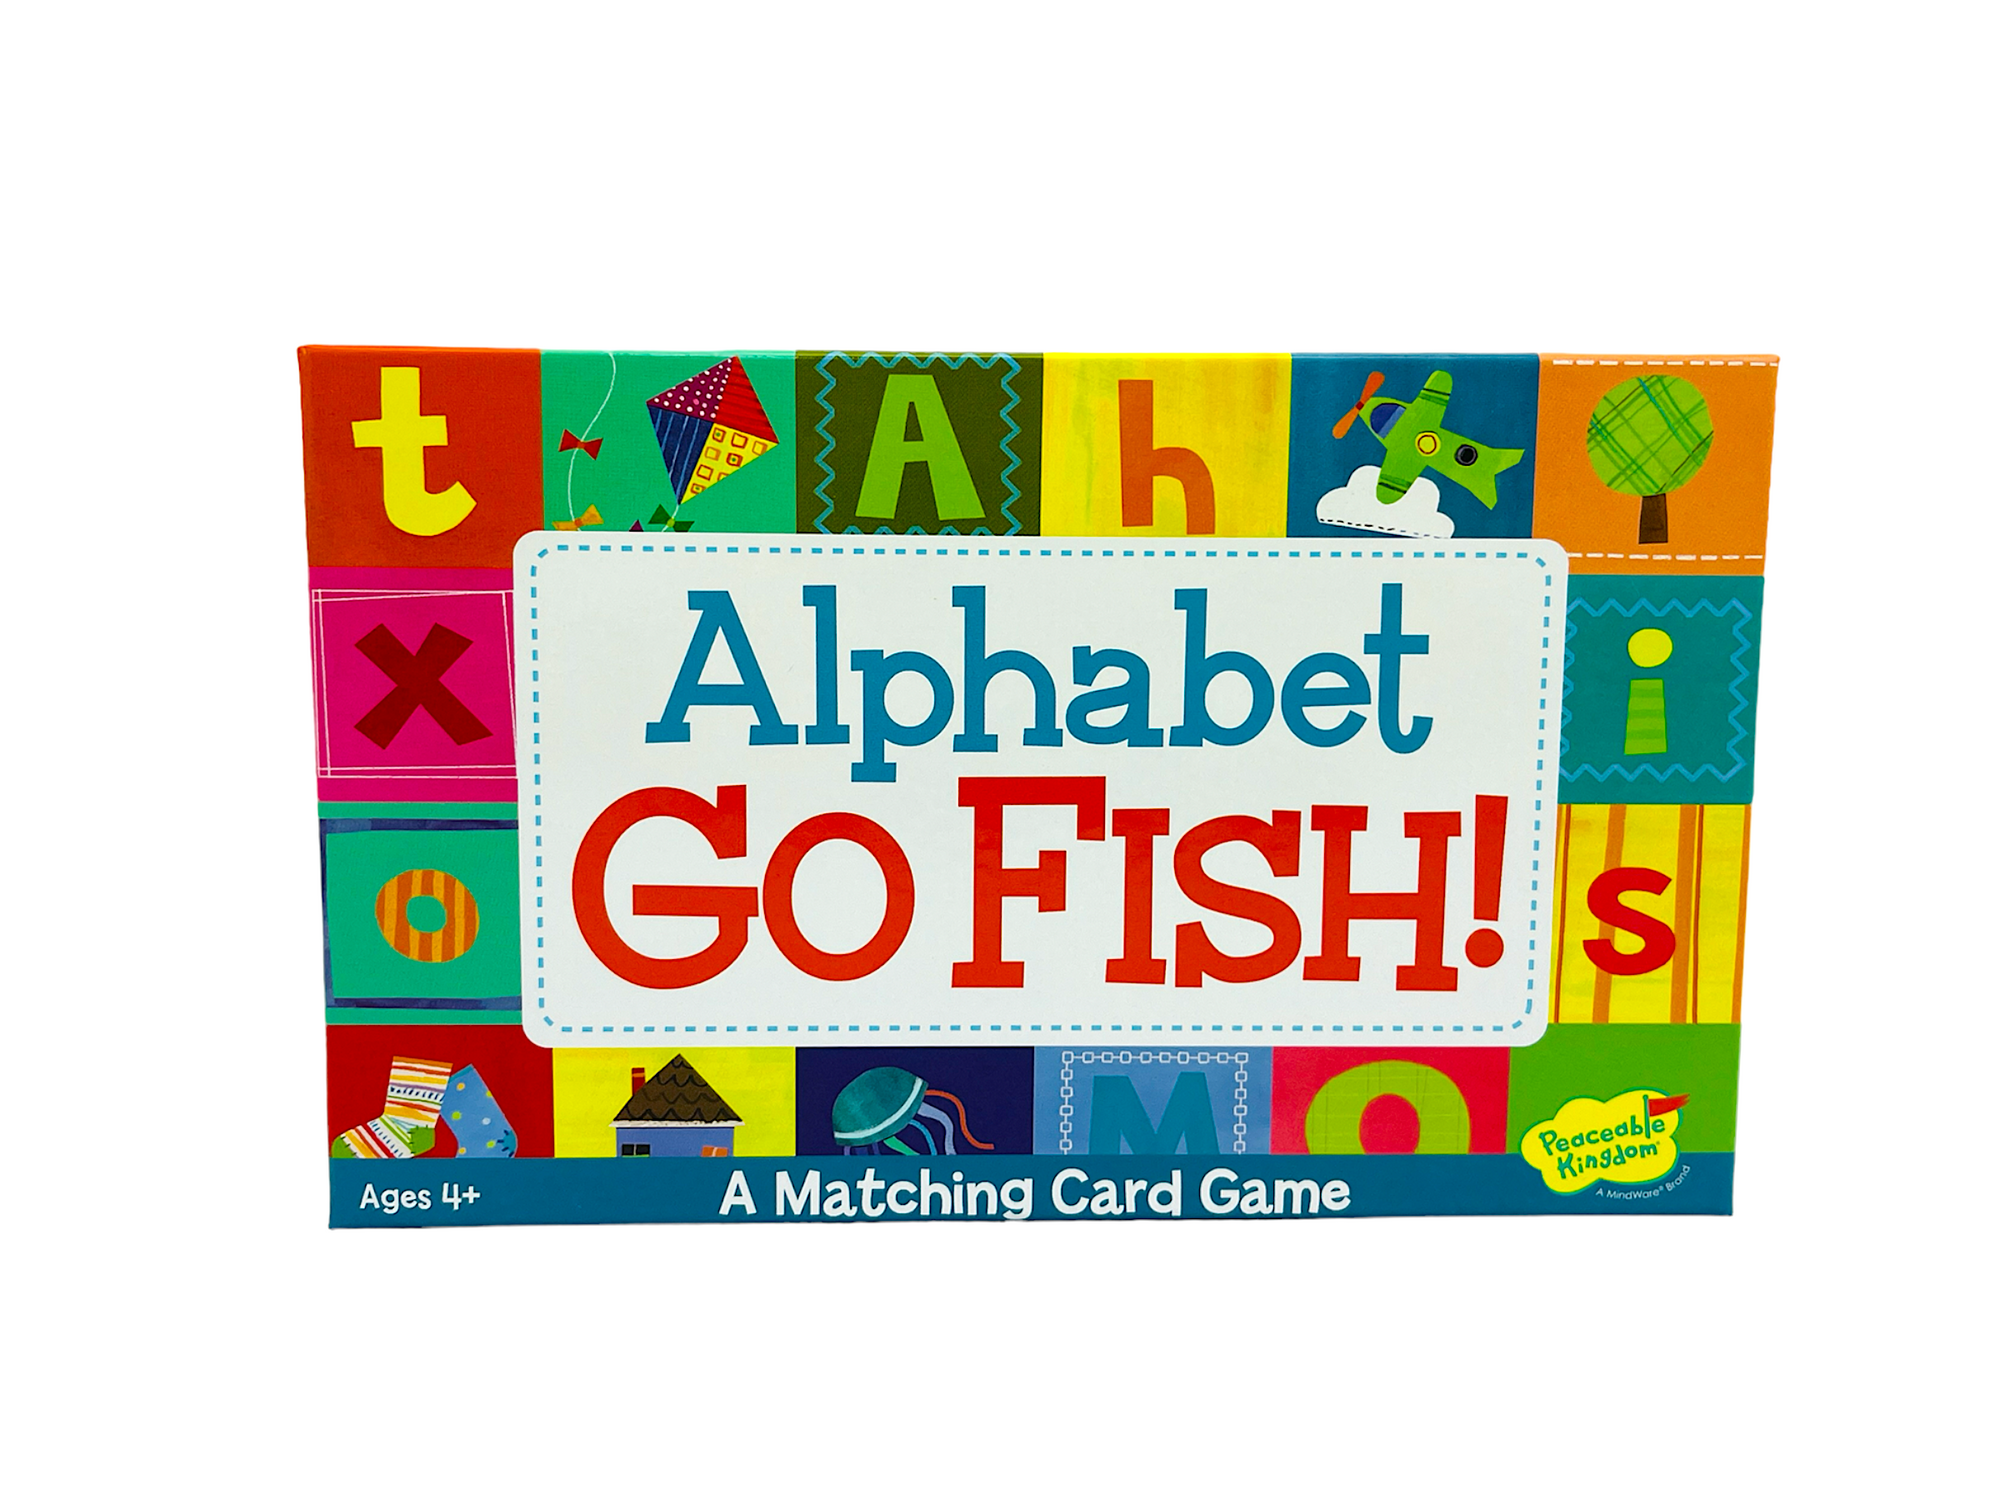 the Alphabet Go Fish! Matching Card Game box on a white background